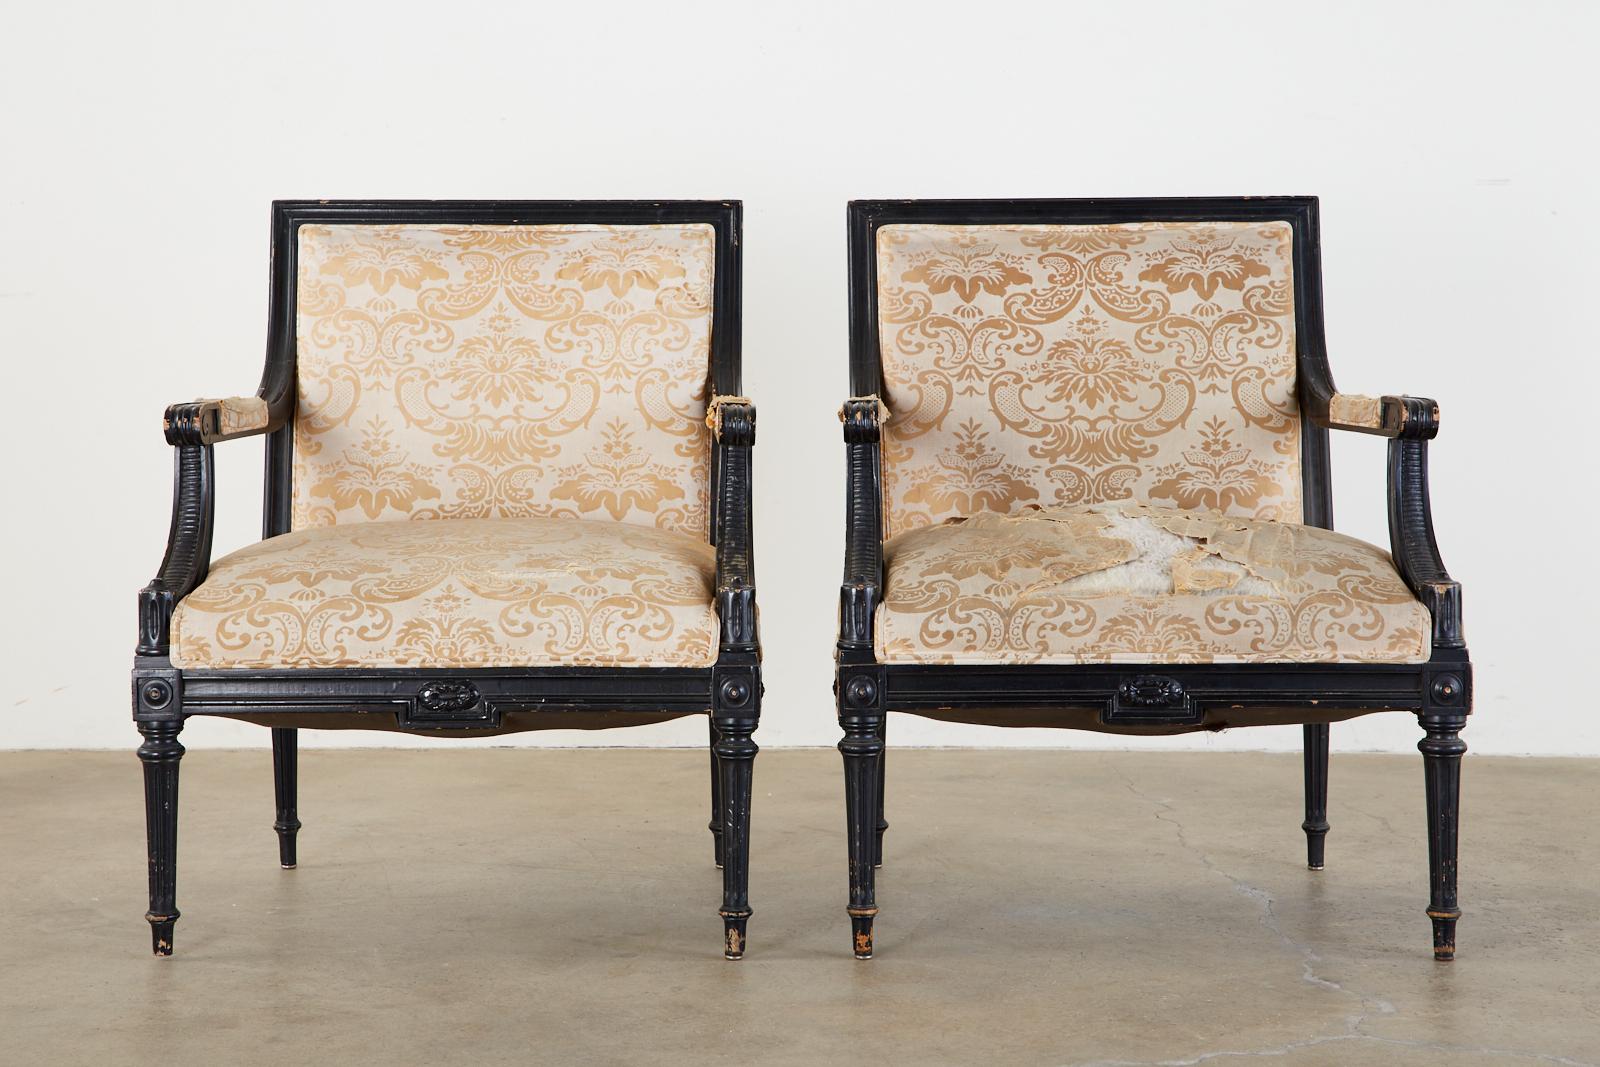 Dramatic pair of French Louis XVI style fauteuil armchairs attributed to Maison Jansen. The chairs are in 